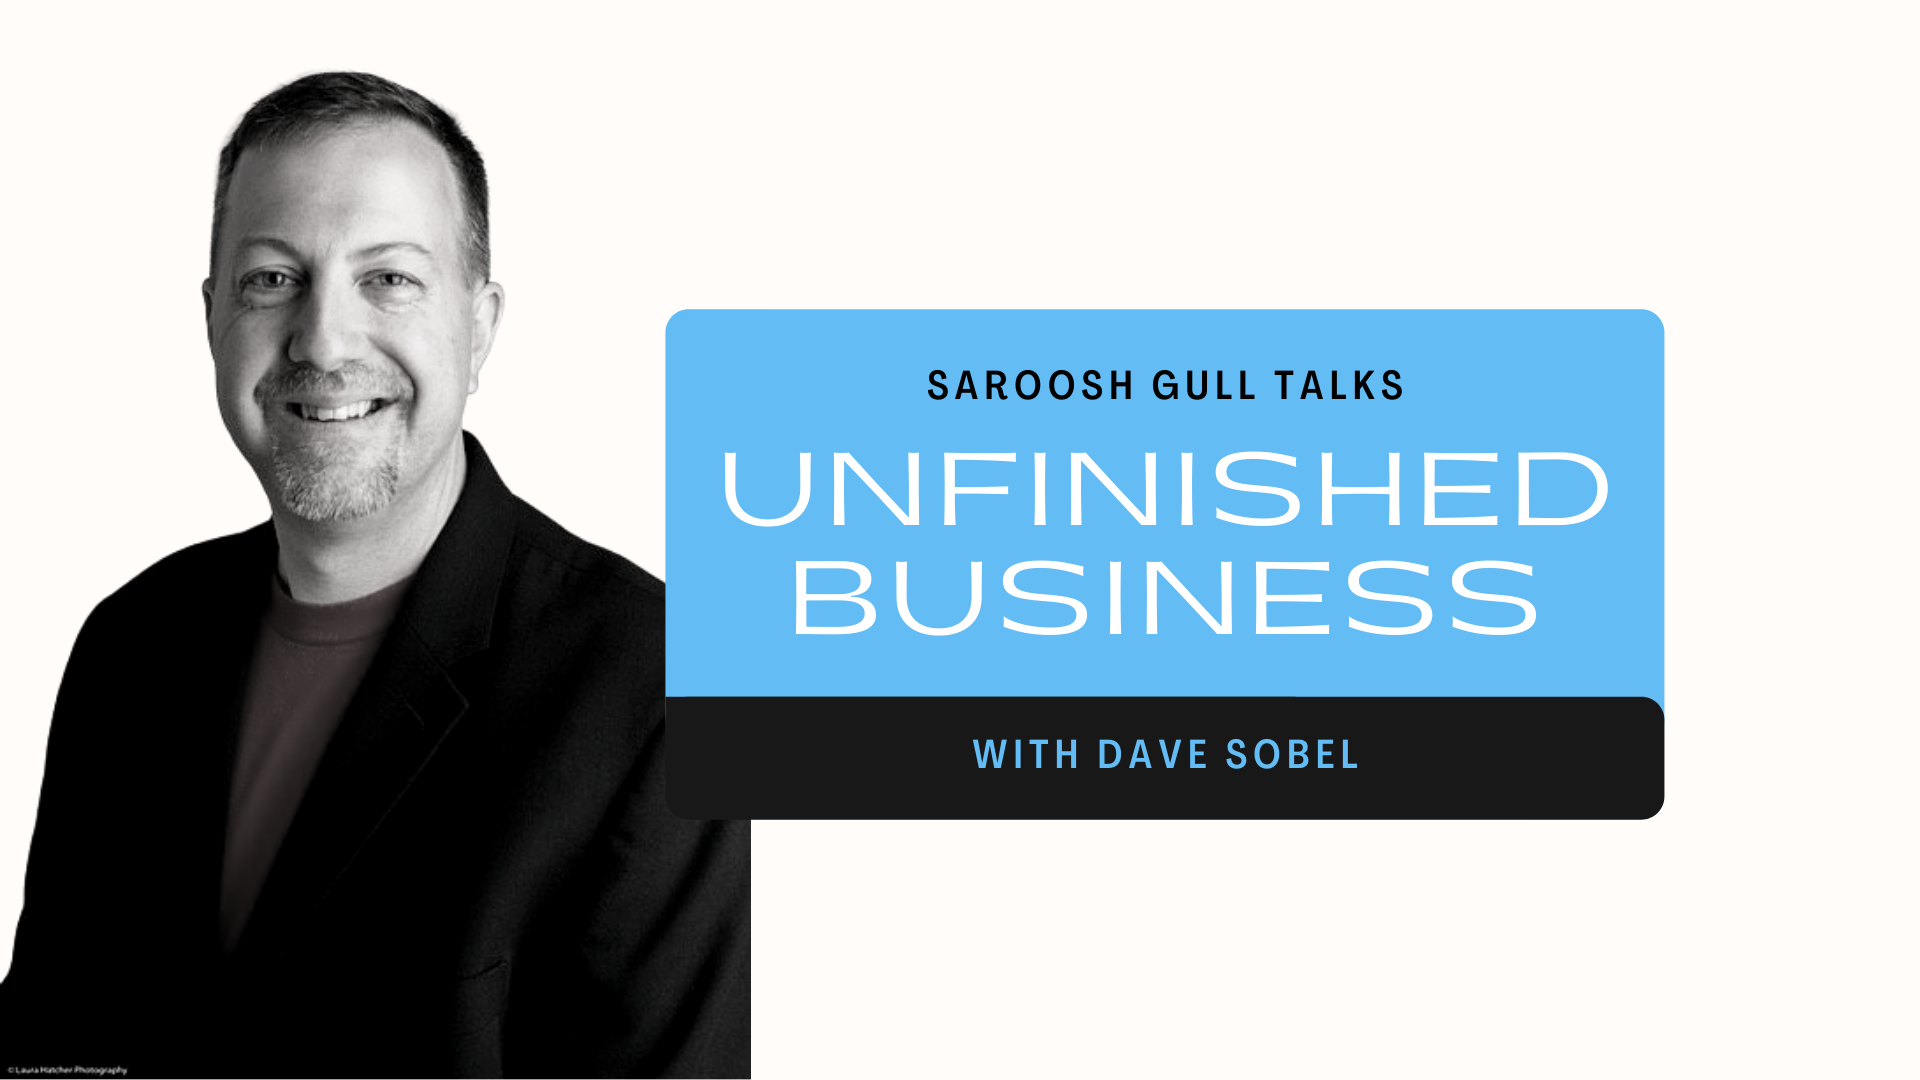 Unfinished Business with Dave Sobel